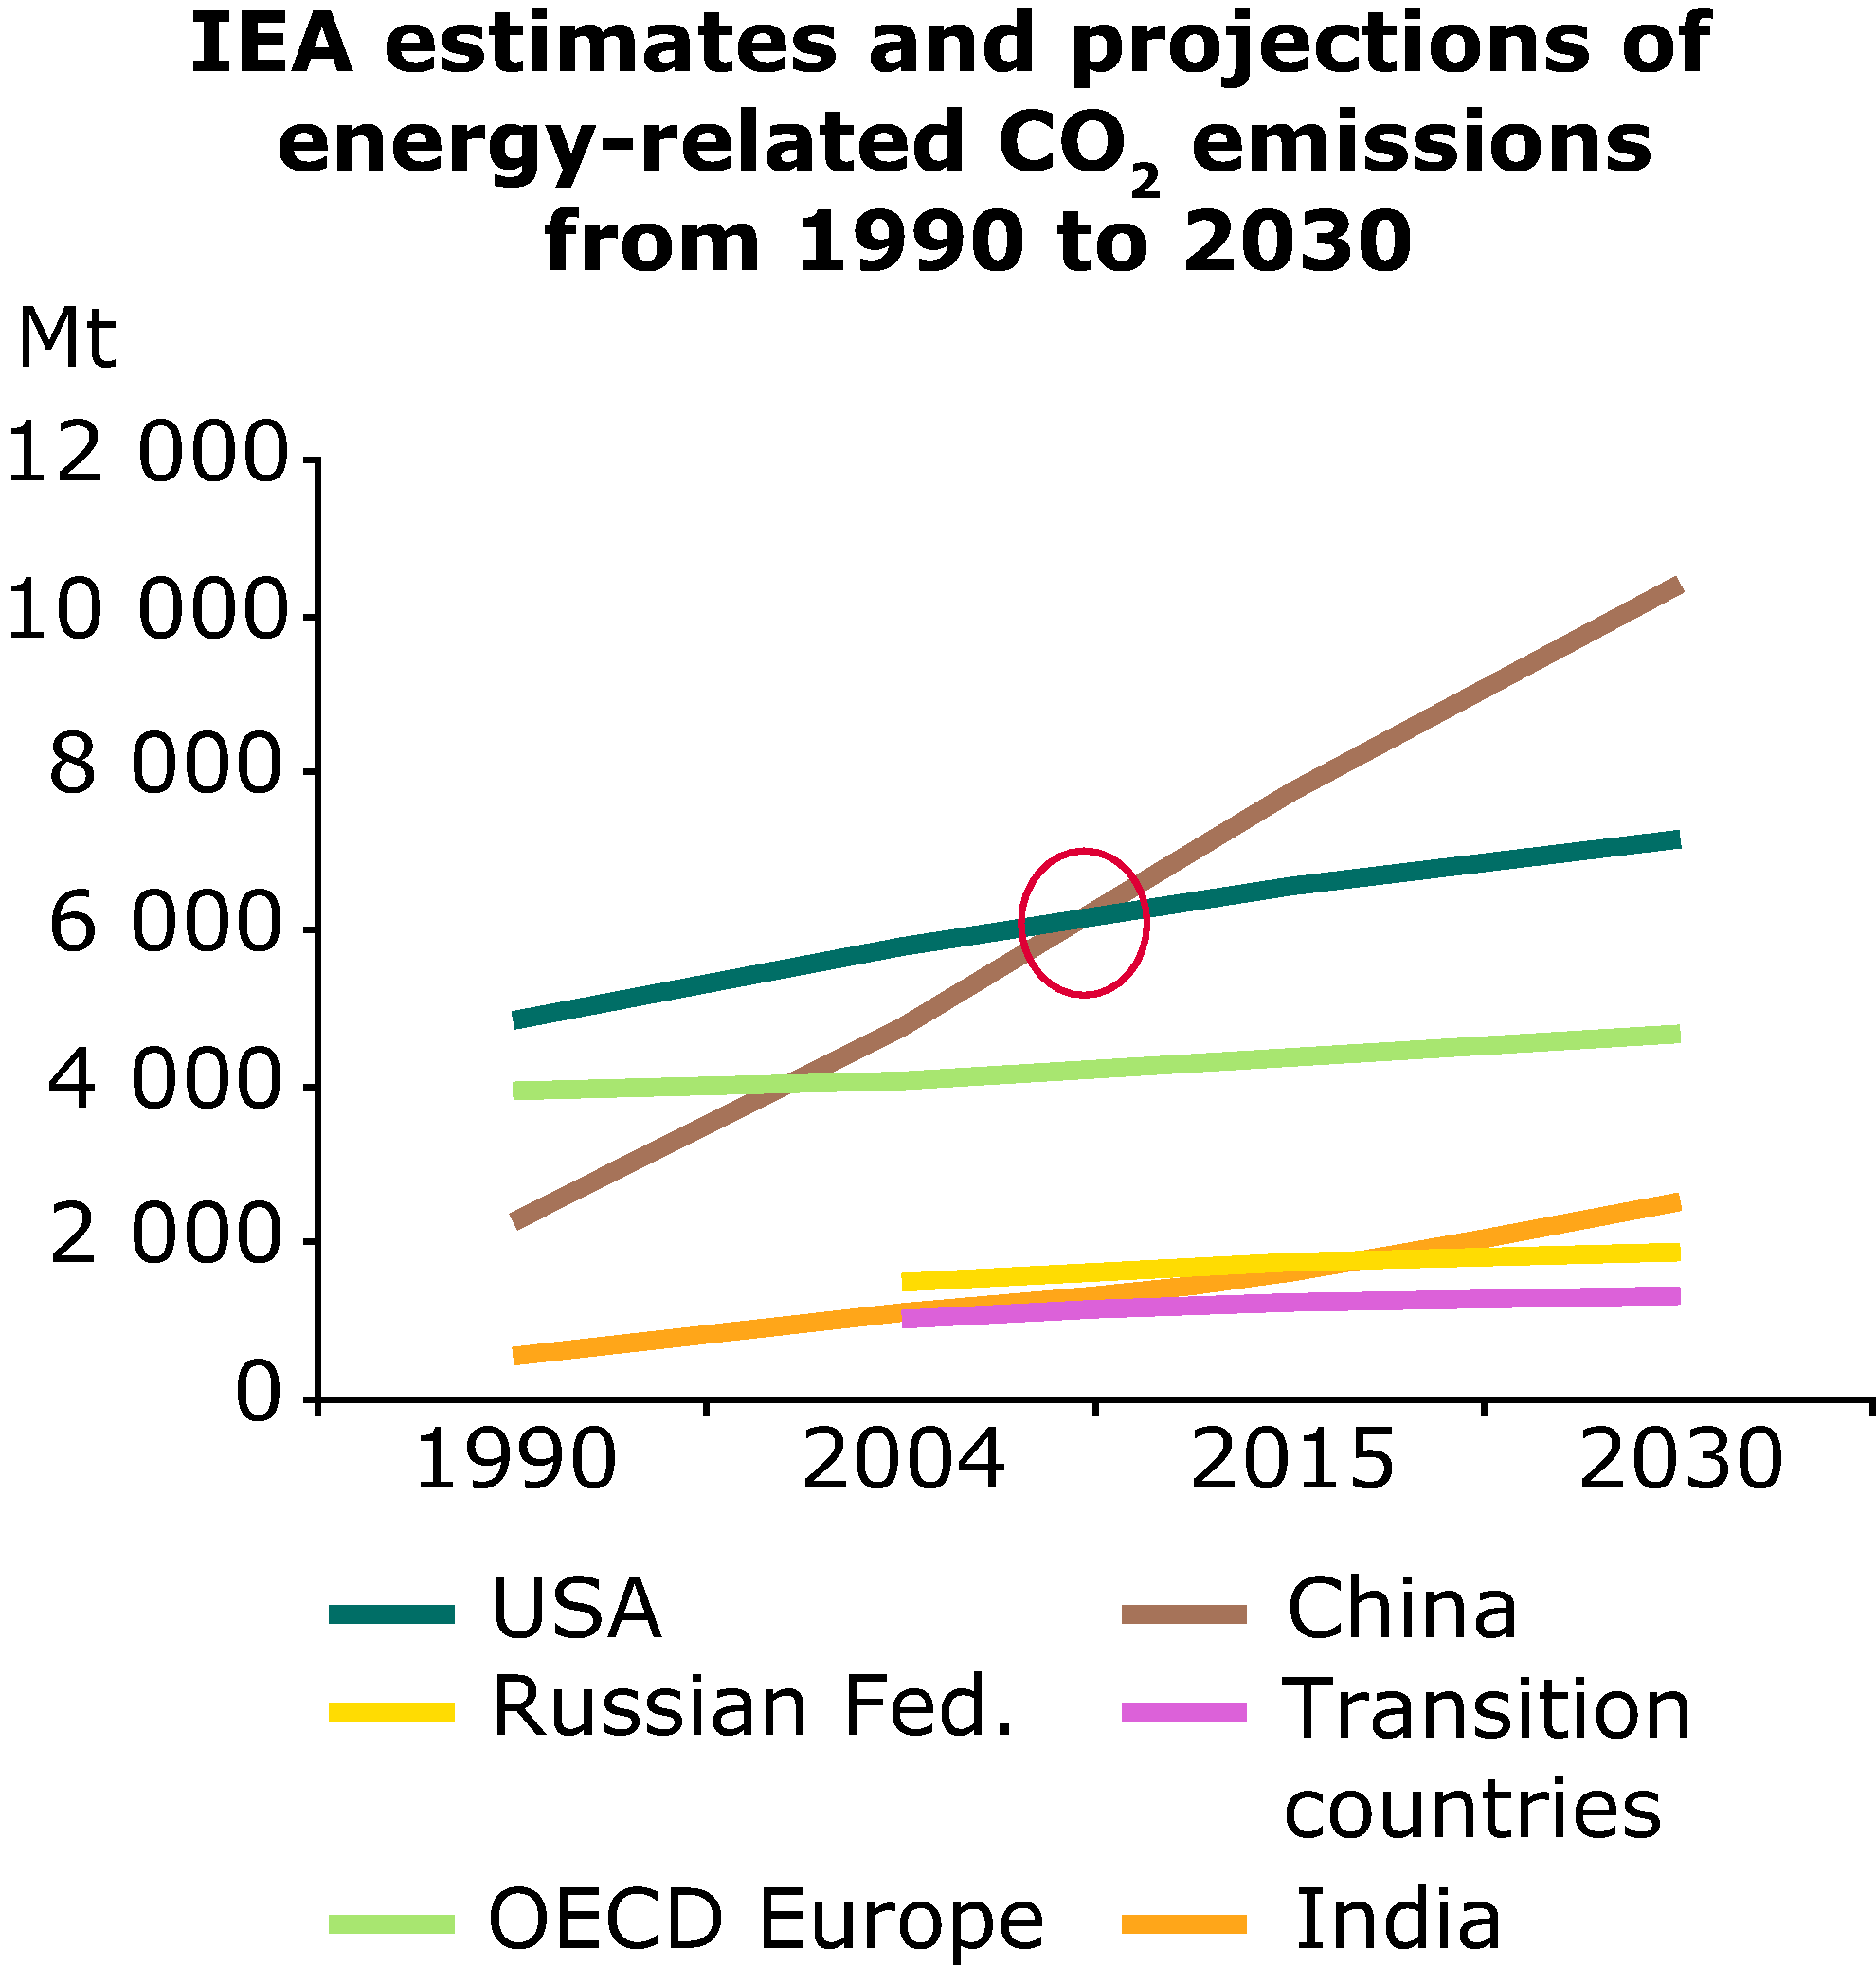 IEA estimates and projections of energy-related CO2 emissions from 1990 to 2030